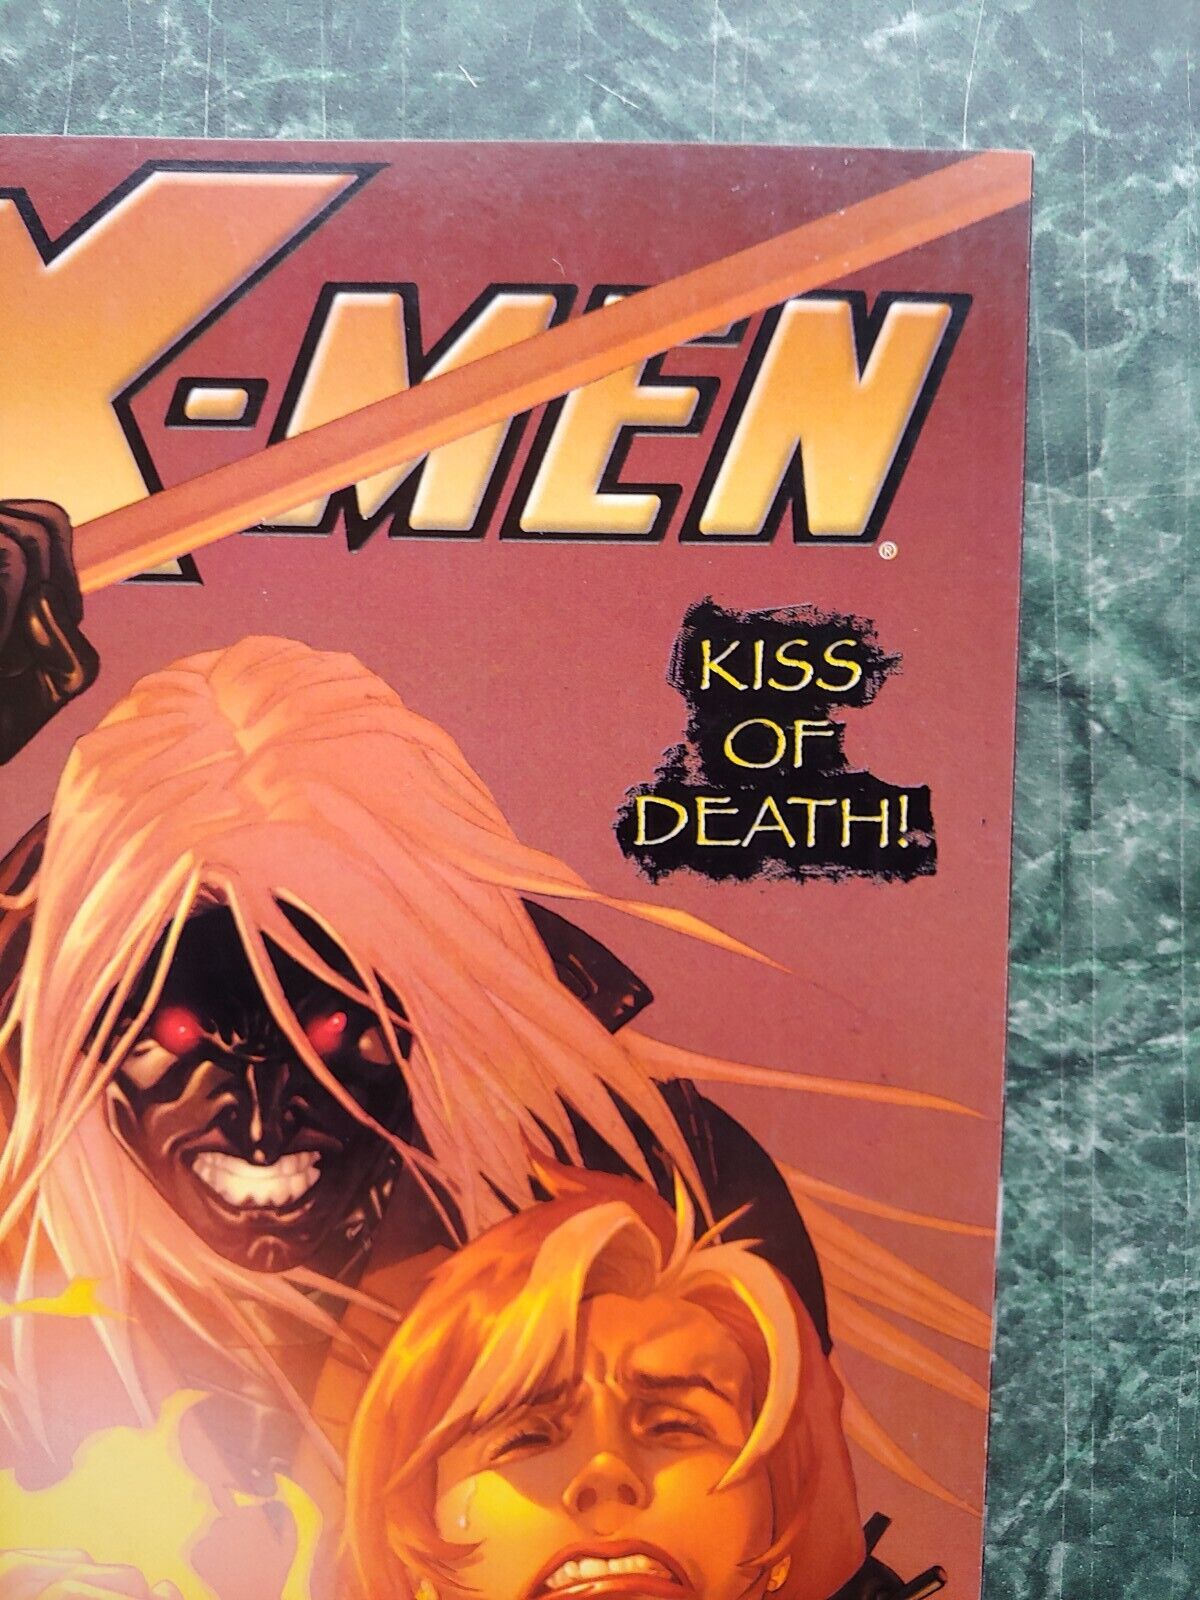 Earth-X-Men Condemned Gambit to Death